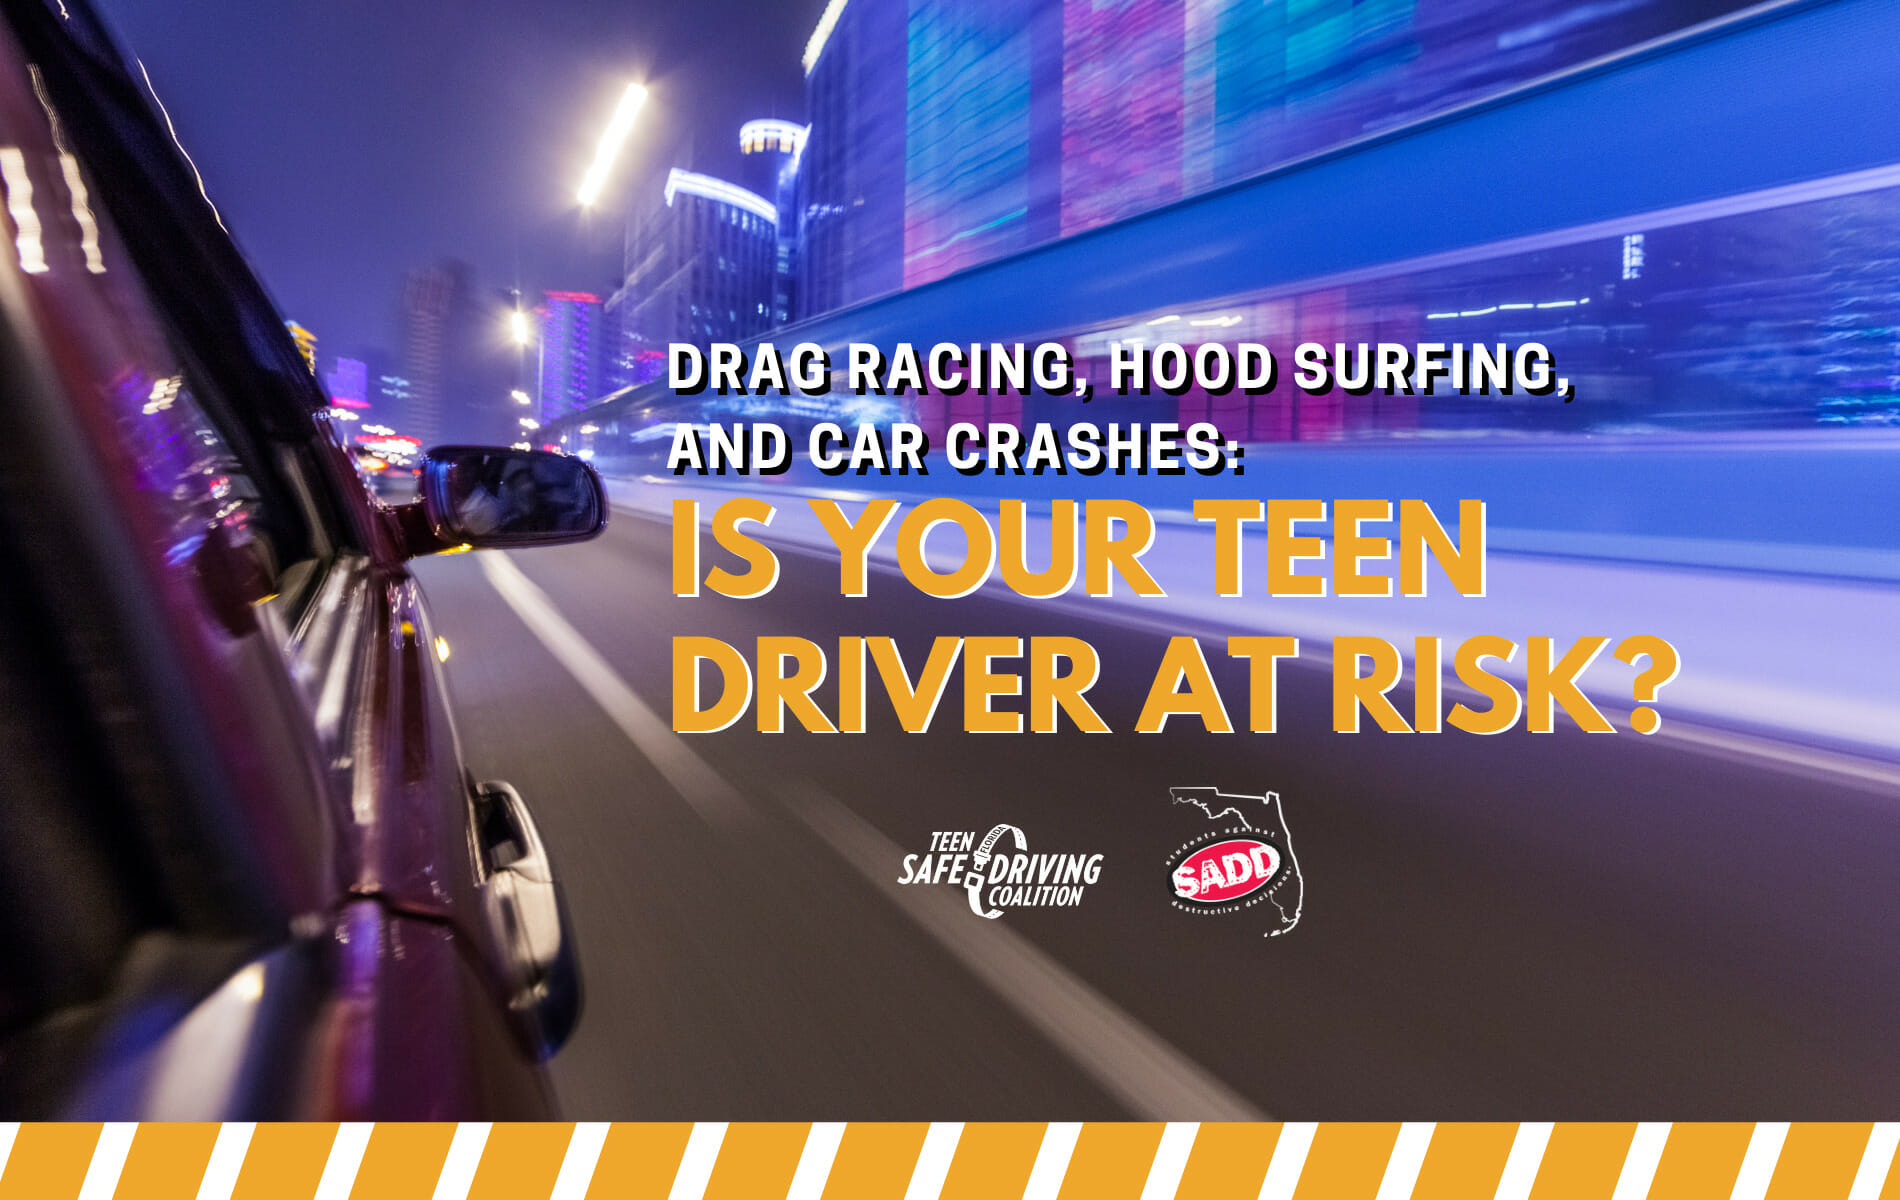 Drag Racing, Hood Surfing, and Car Crashes: Is Your Teen Driver at Risk?